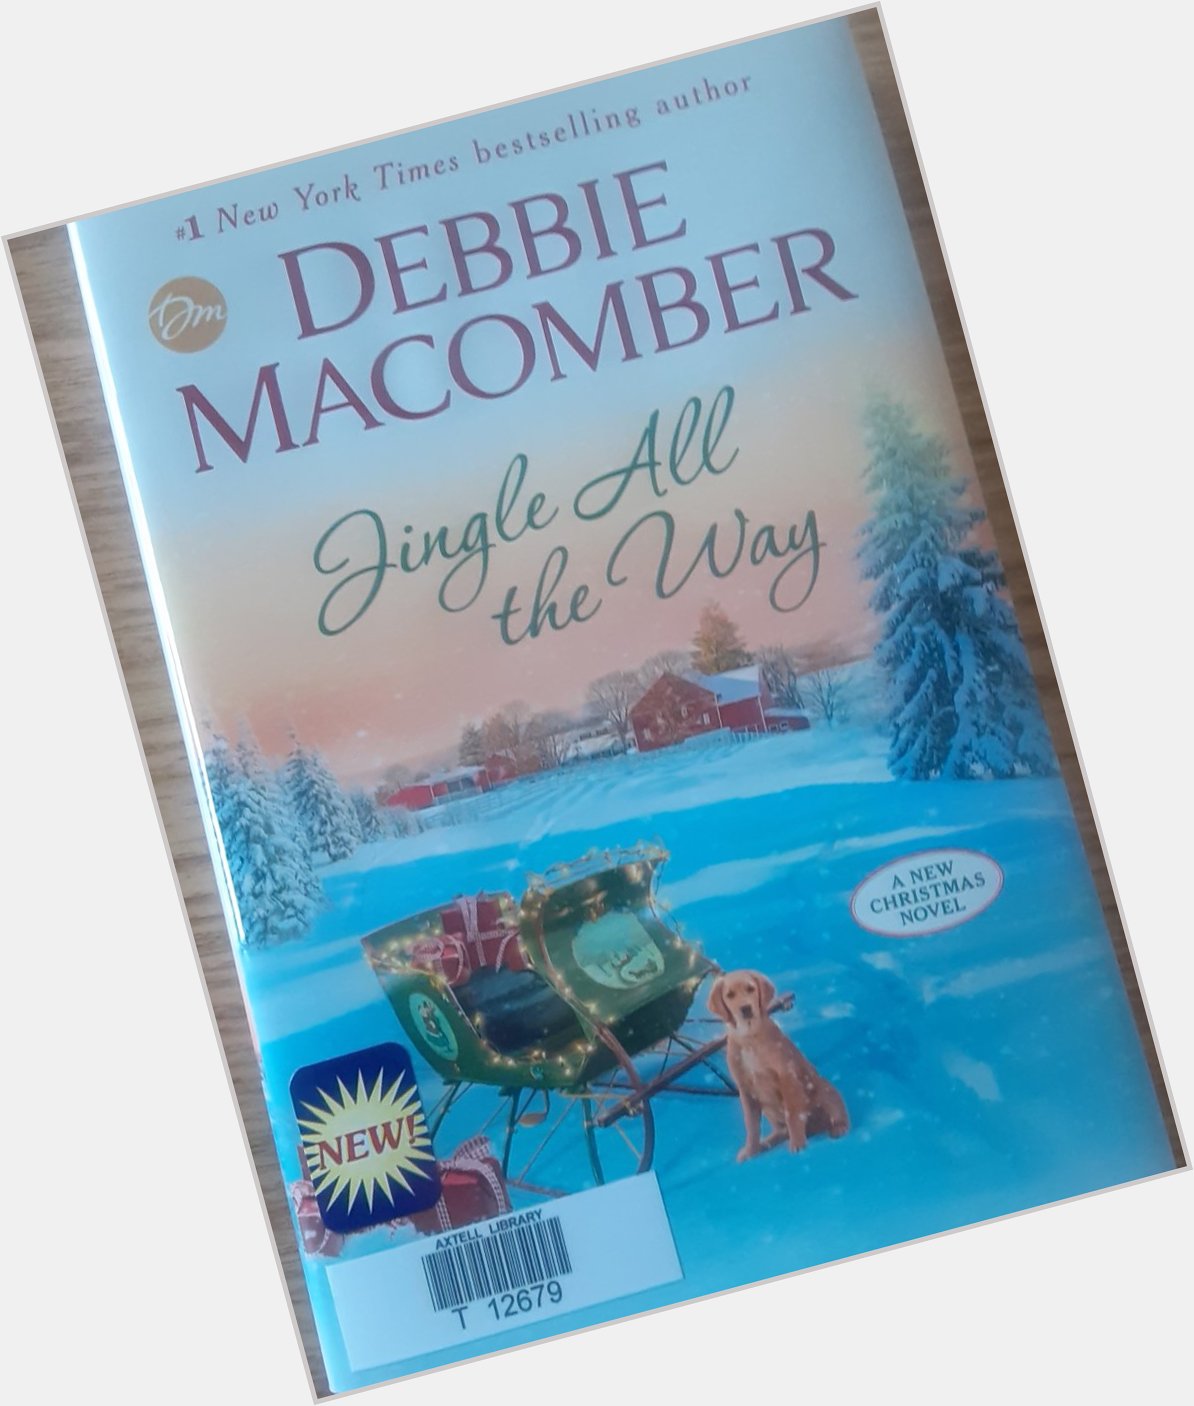 Happy Birthday to author, Debbie Macomber.  She is 72 today! And, we have her latest Christmas book! 